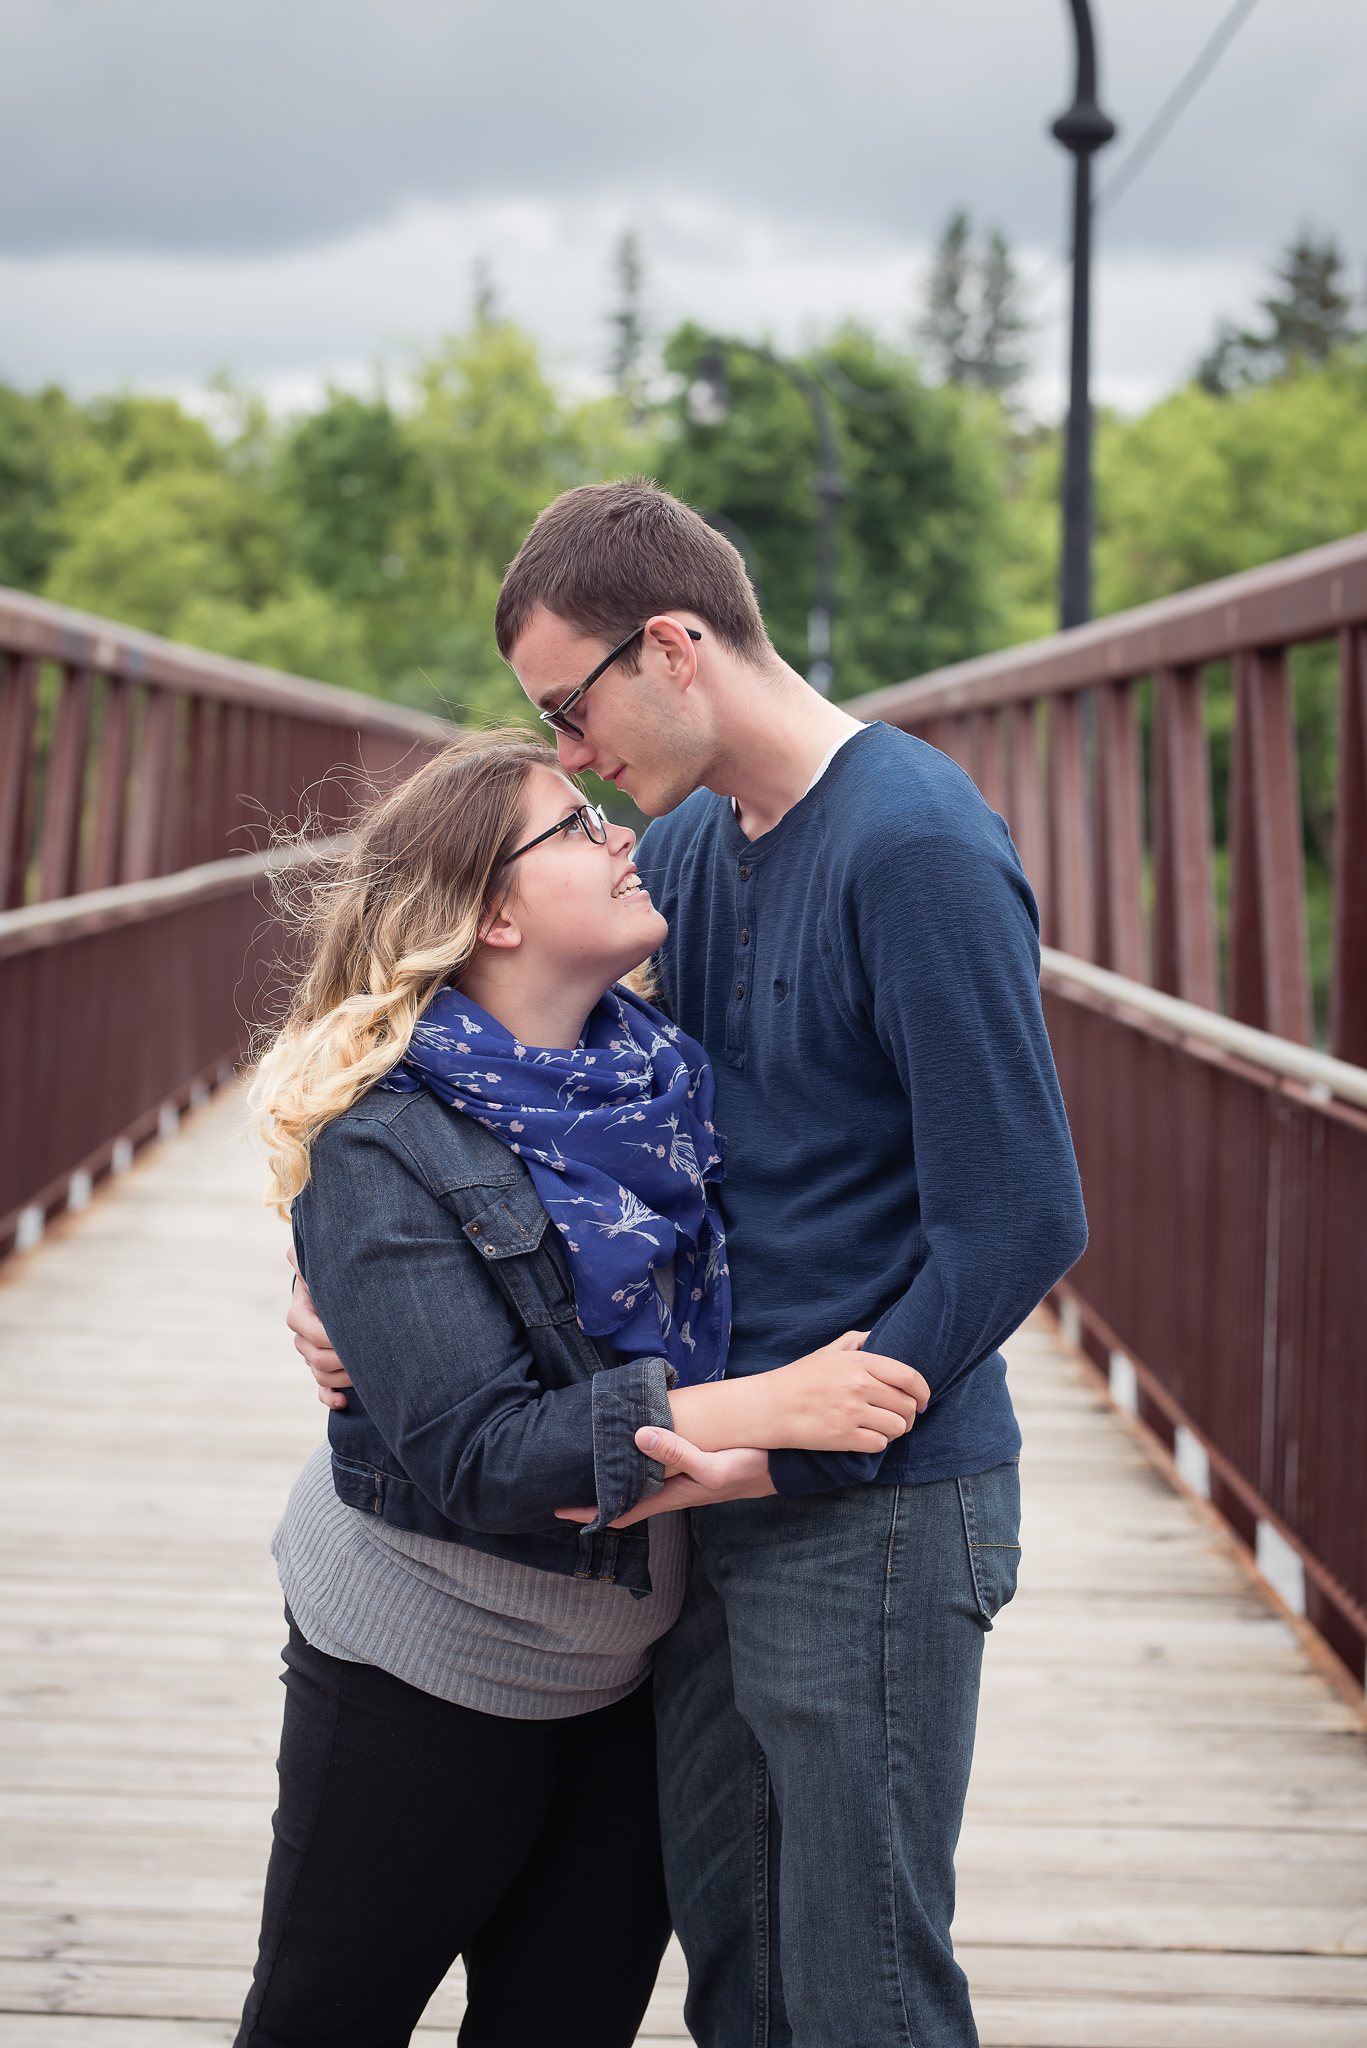 Couples40NaomiLuciennePhotography062018-2-Edit.jpg